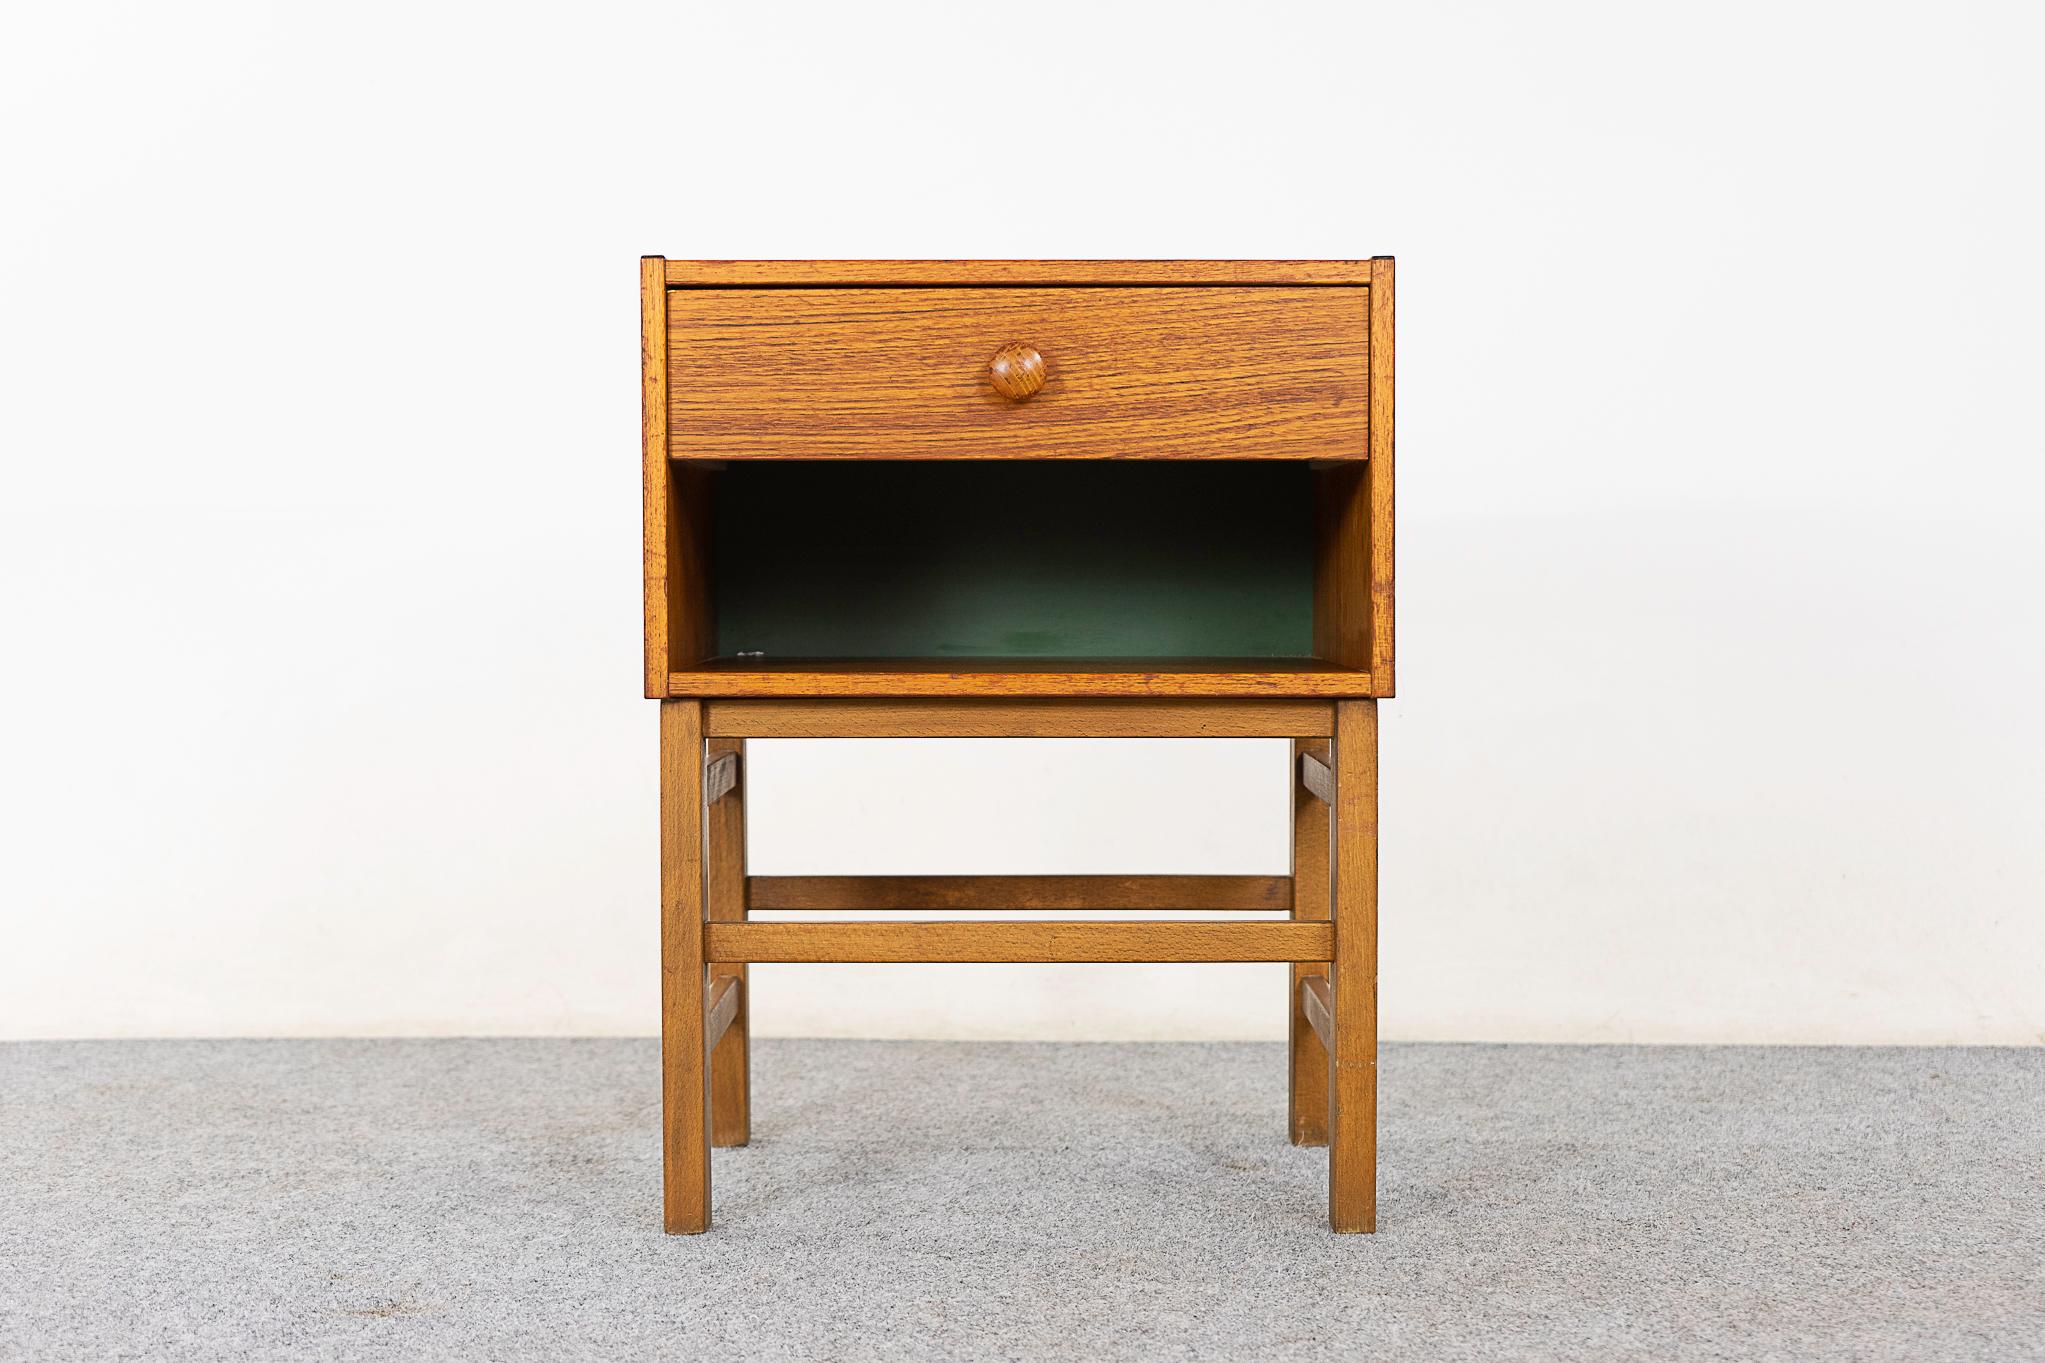 Teak & beech Danish bedside table, circa 1960's. Compact single drawer table with open cubby. Veneered case rests on a robust base with cross supports. 

Please inquire for remote and international shipping rates.